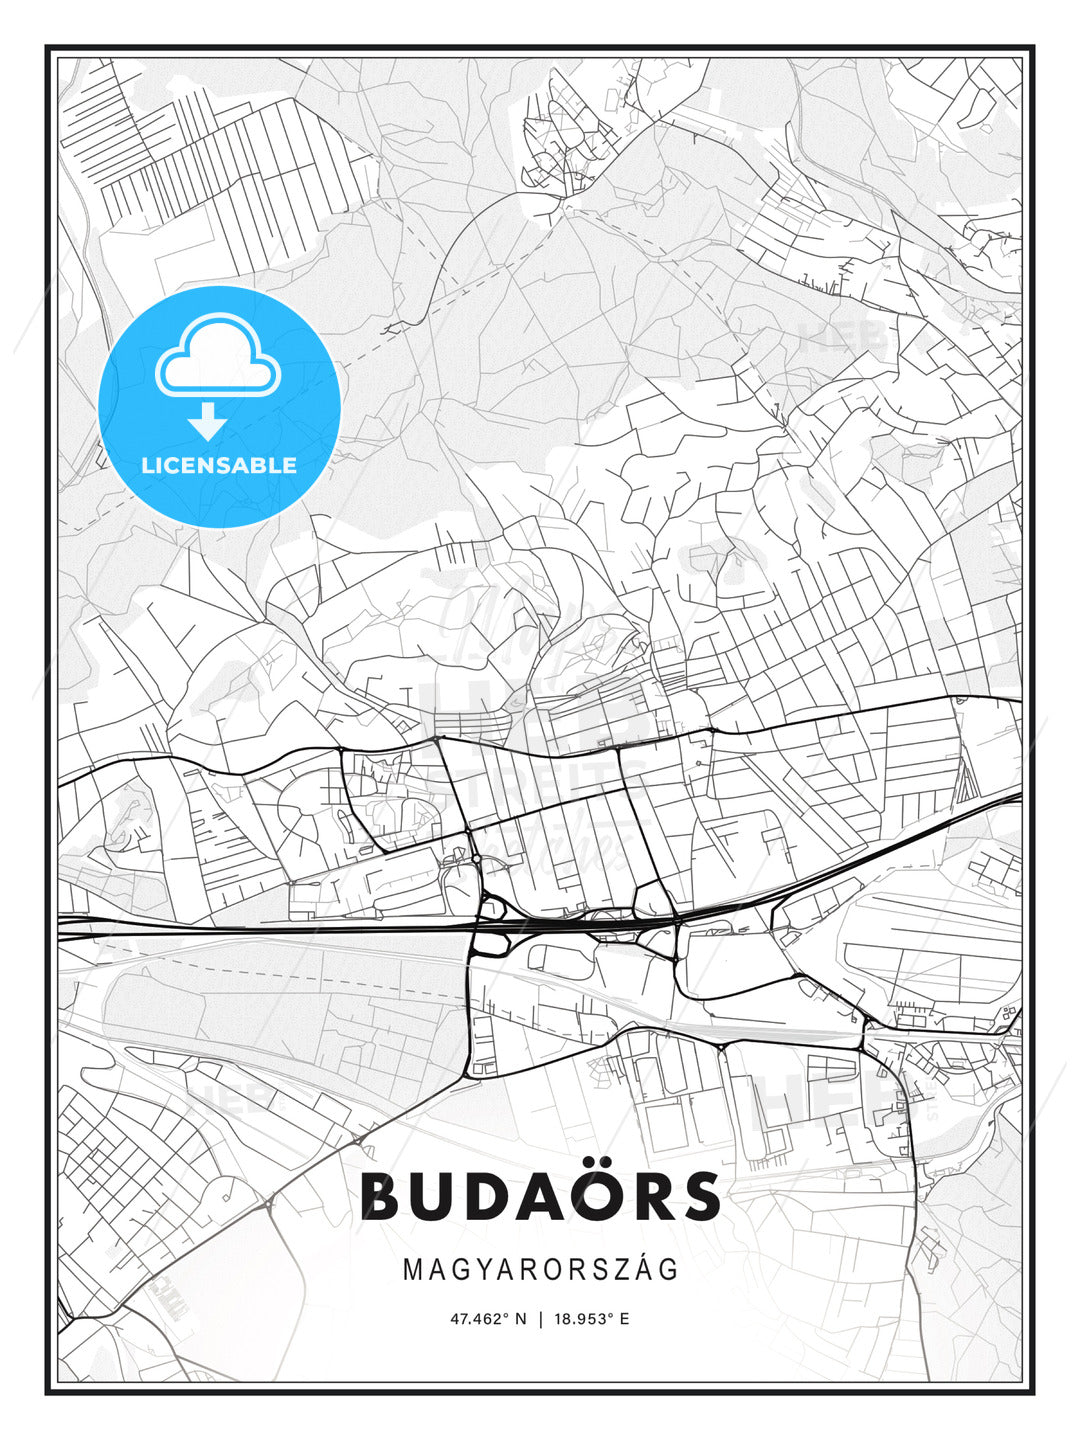 Budaörs, Hungary, Modern Print Template in Various Formats - HEBSTREITS Sketches